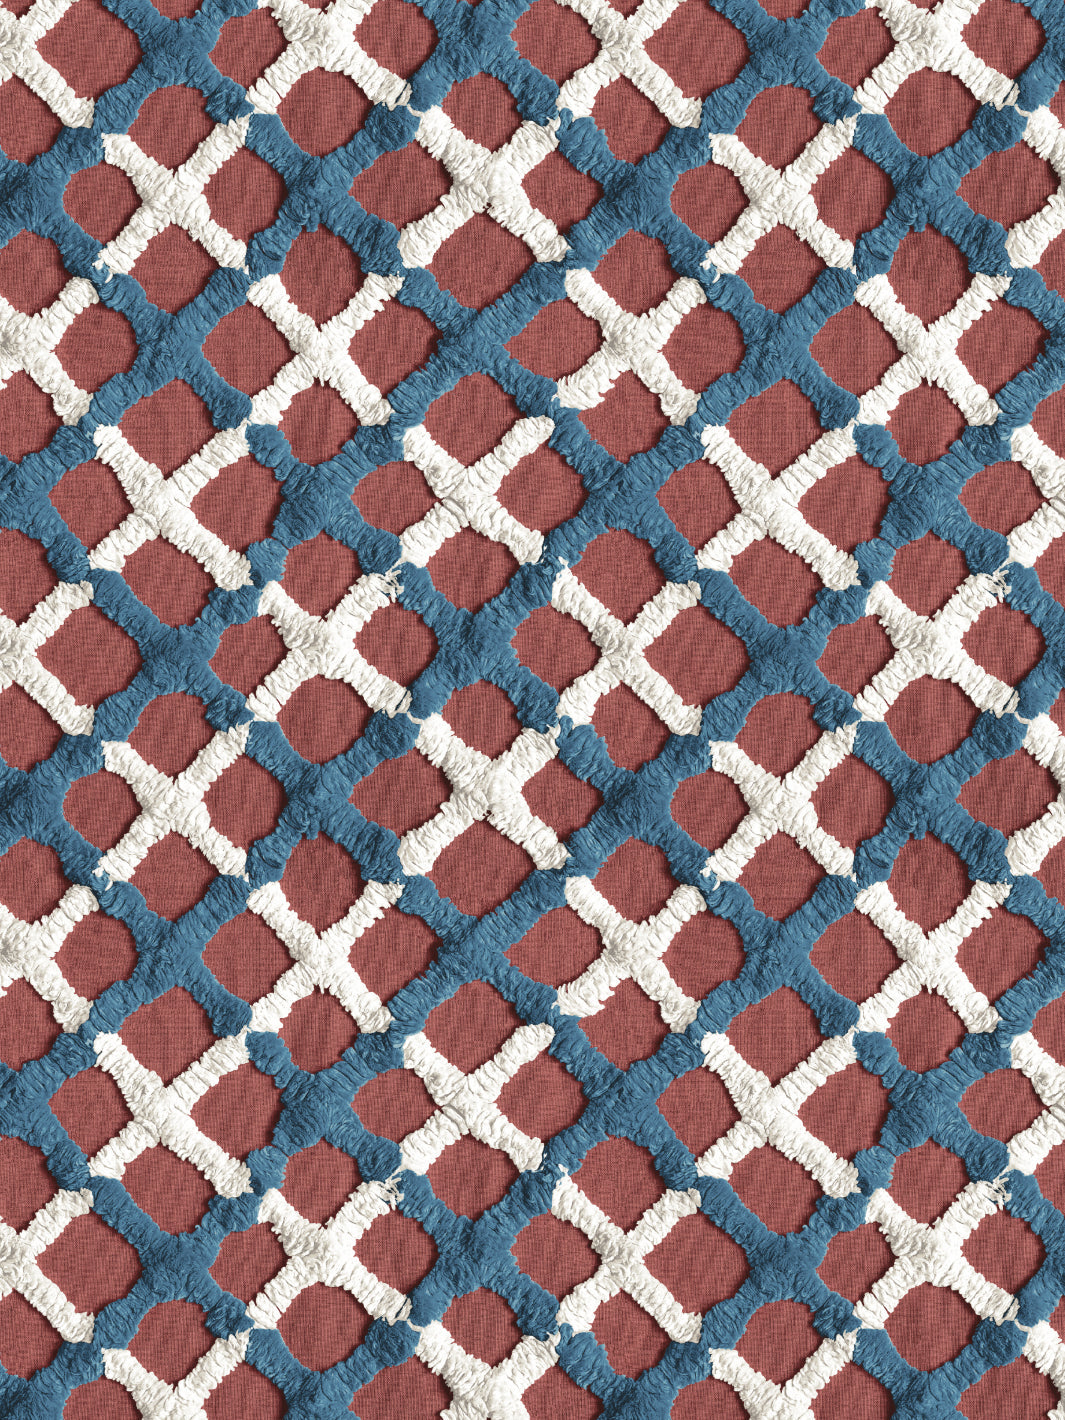 'Chenille Quilt' Wallpaper by Chris Benz - Red Blue + White